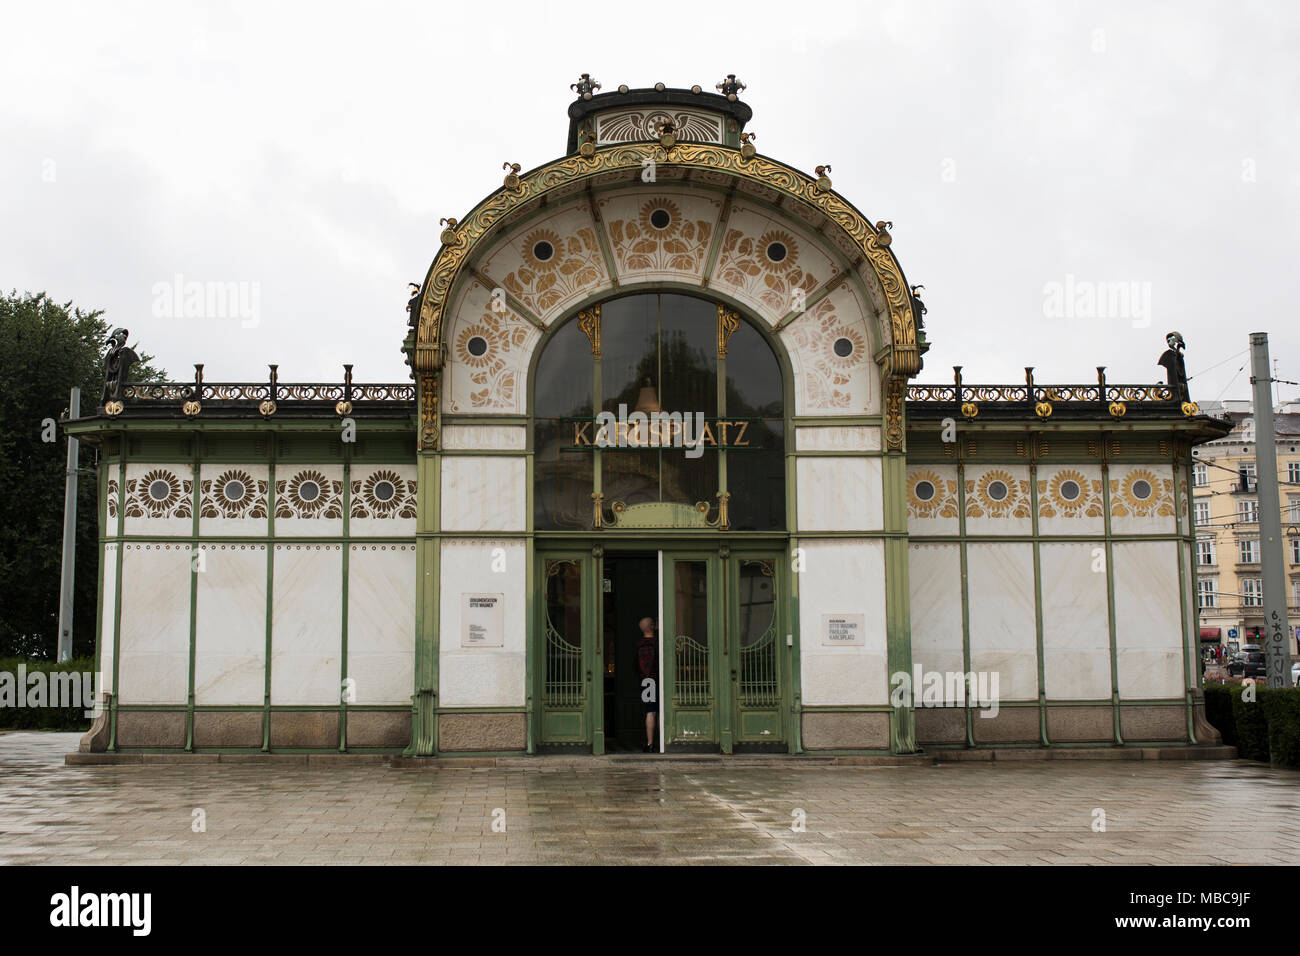 Karlsplatz Stadtbahn Station in Vienna, Austria, one of the pavilions designed by architect Otto Wagner for a former train station no longer in use. Stock Photo